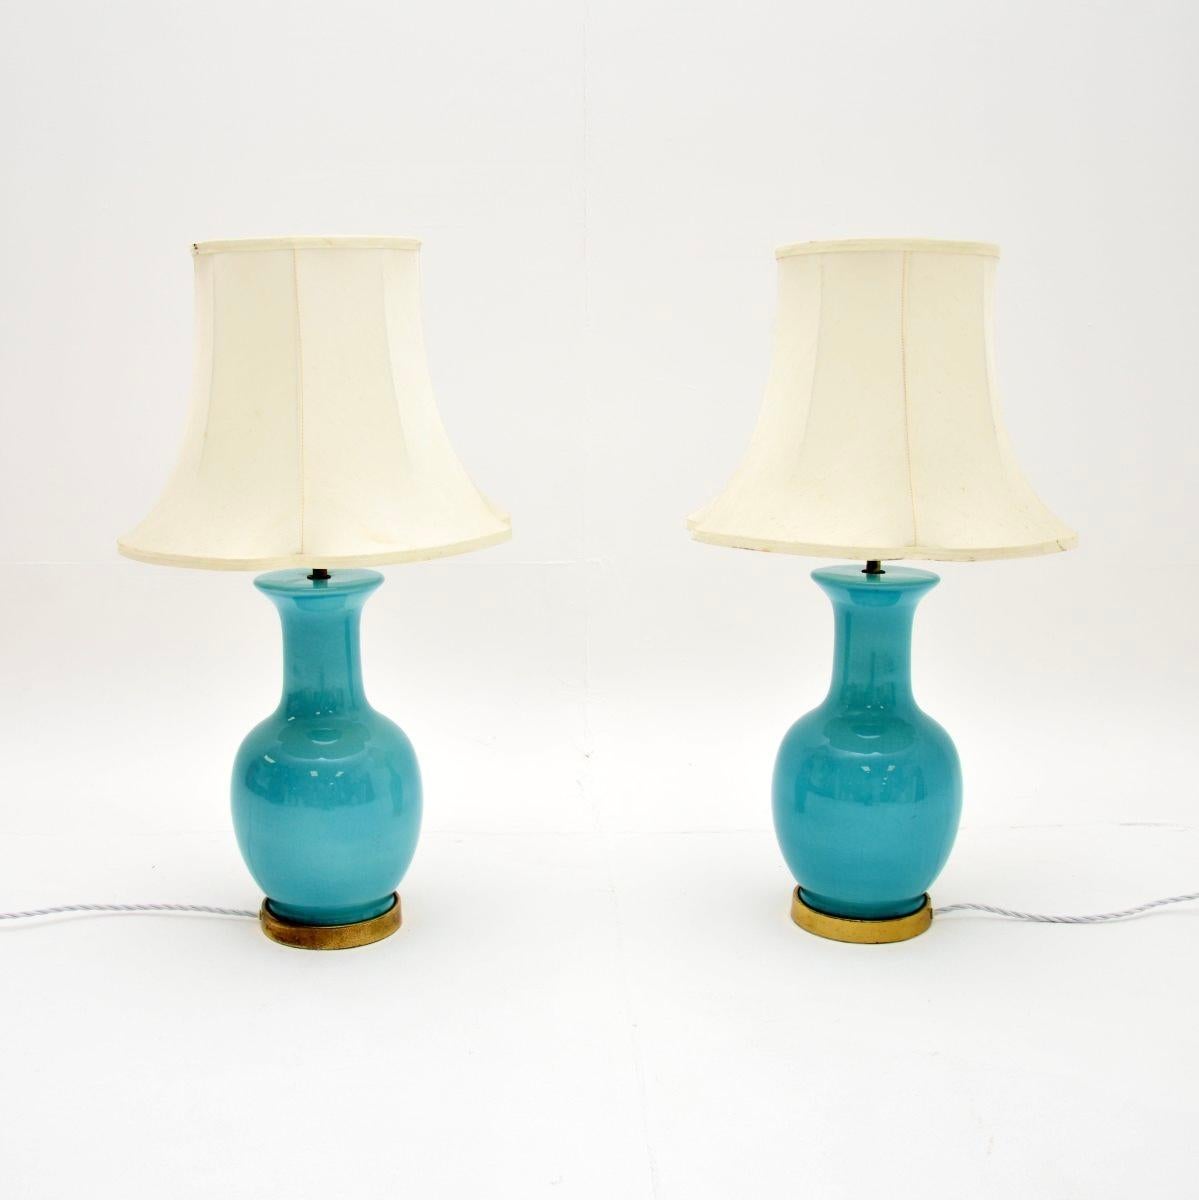 A stunning pair of vintage ceramic and brass table lamps. They were made in England, and date from around the 1960’s.

The ceramic is the most beautiful shade of turquoise blue, accentuated by a brass rim around the lower edge. They are of great